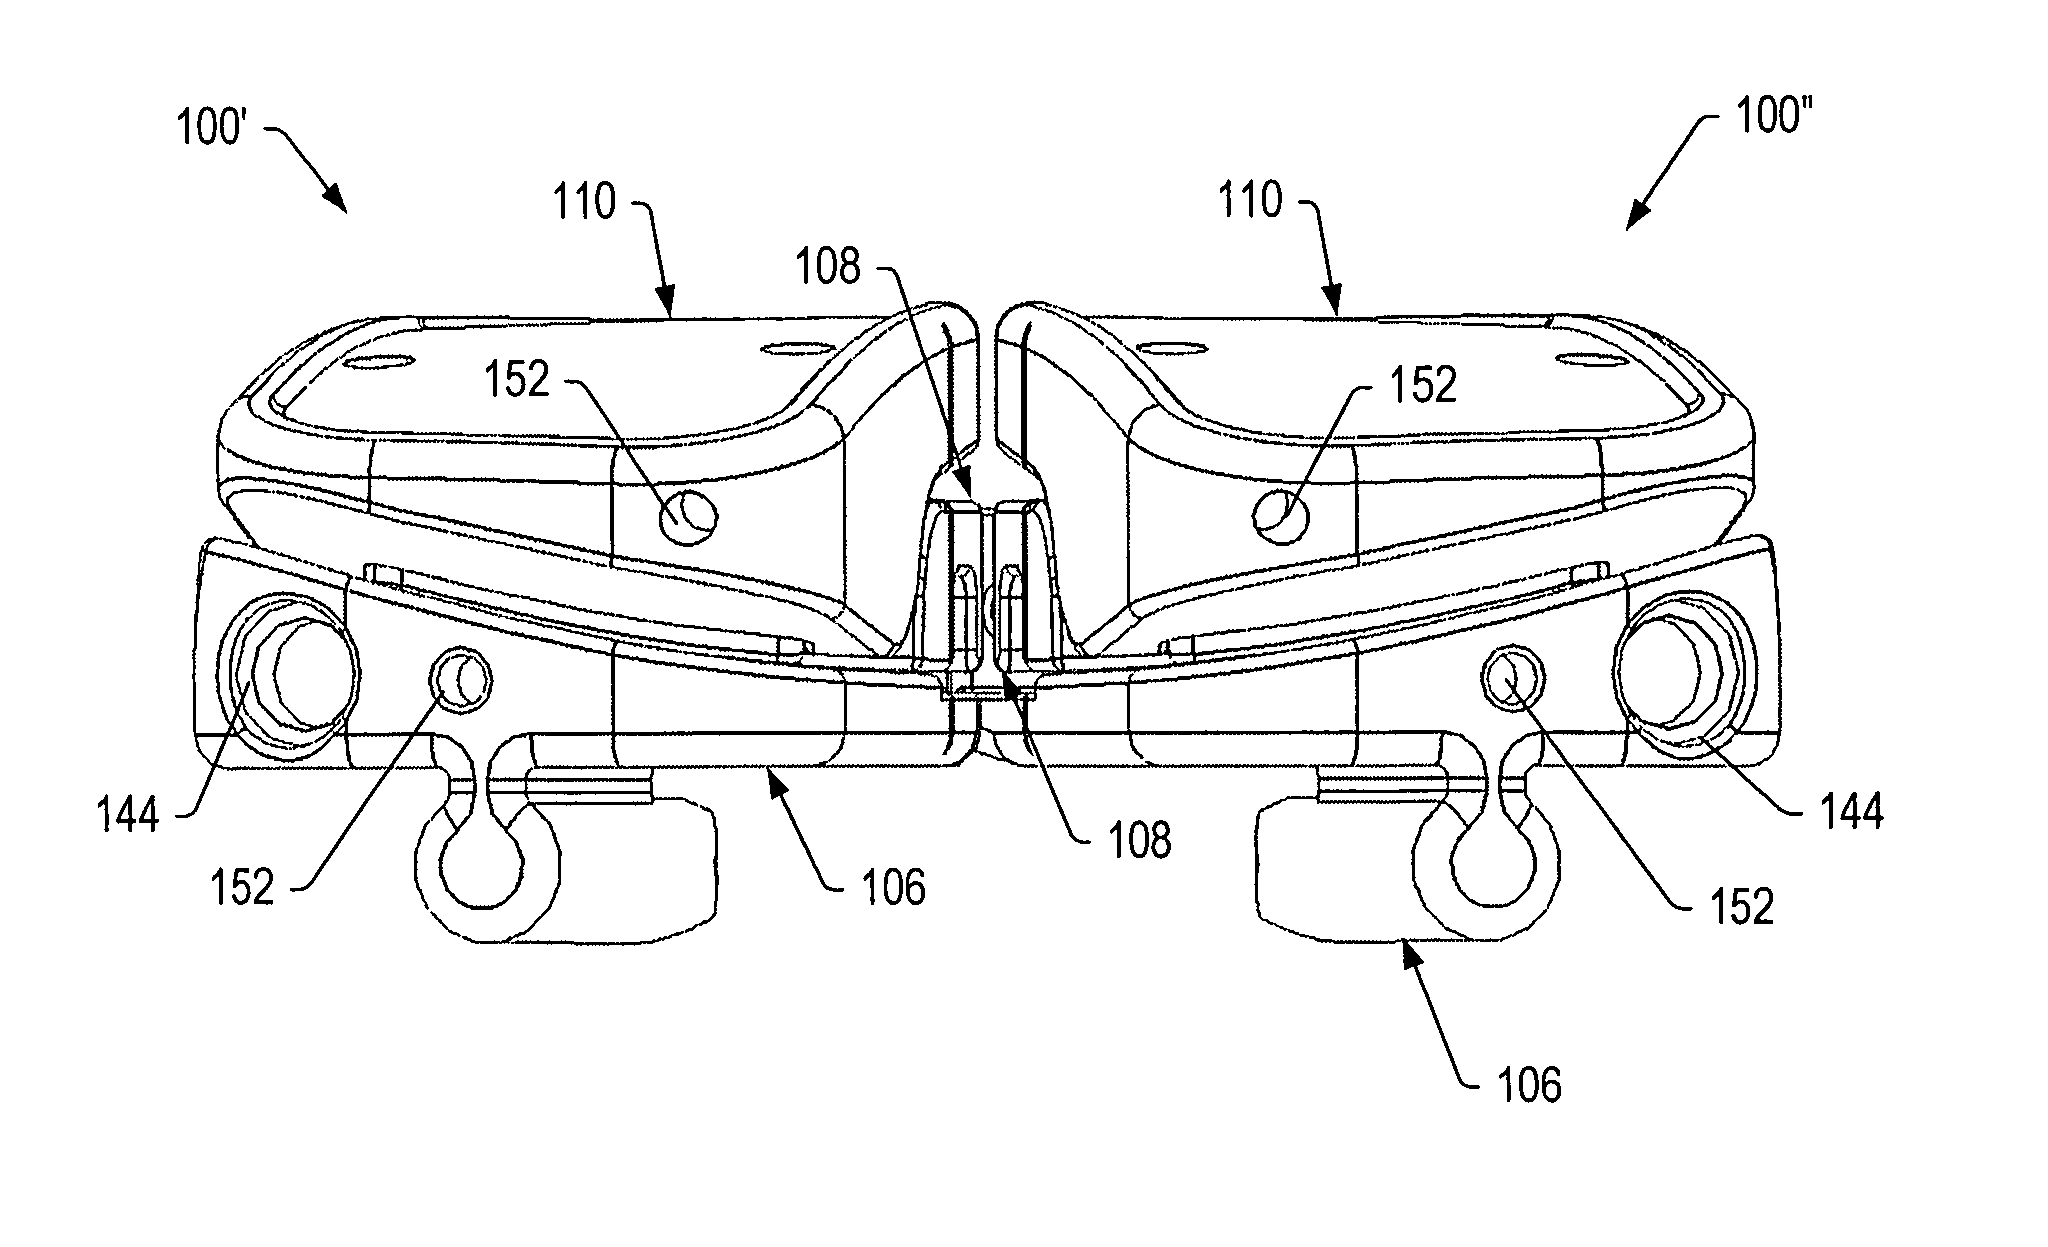 Spinal stabilization systems with dynamic interbody devices